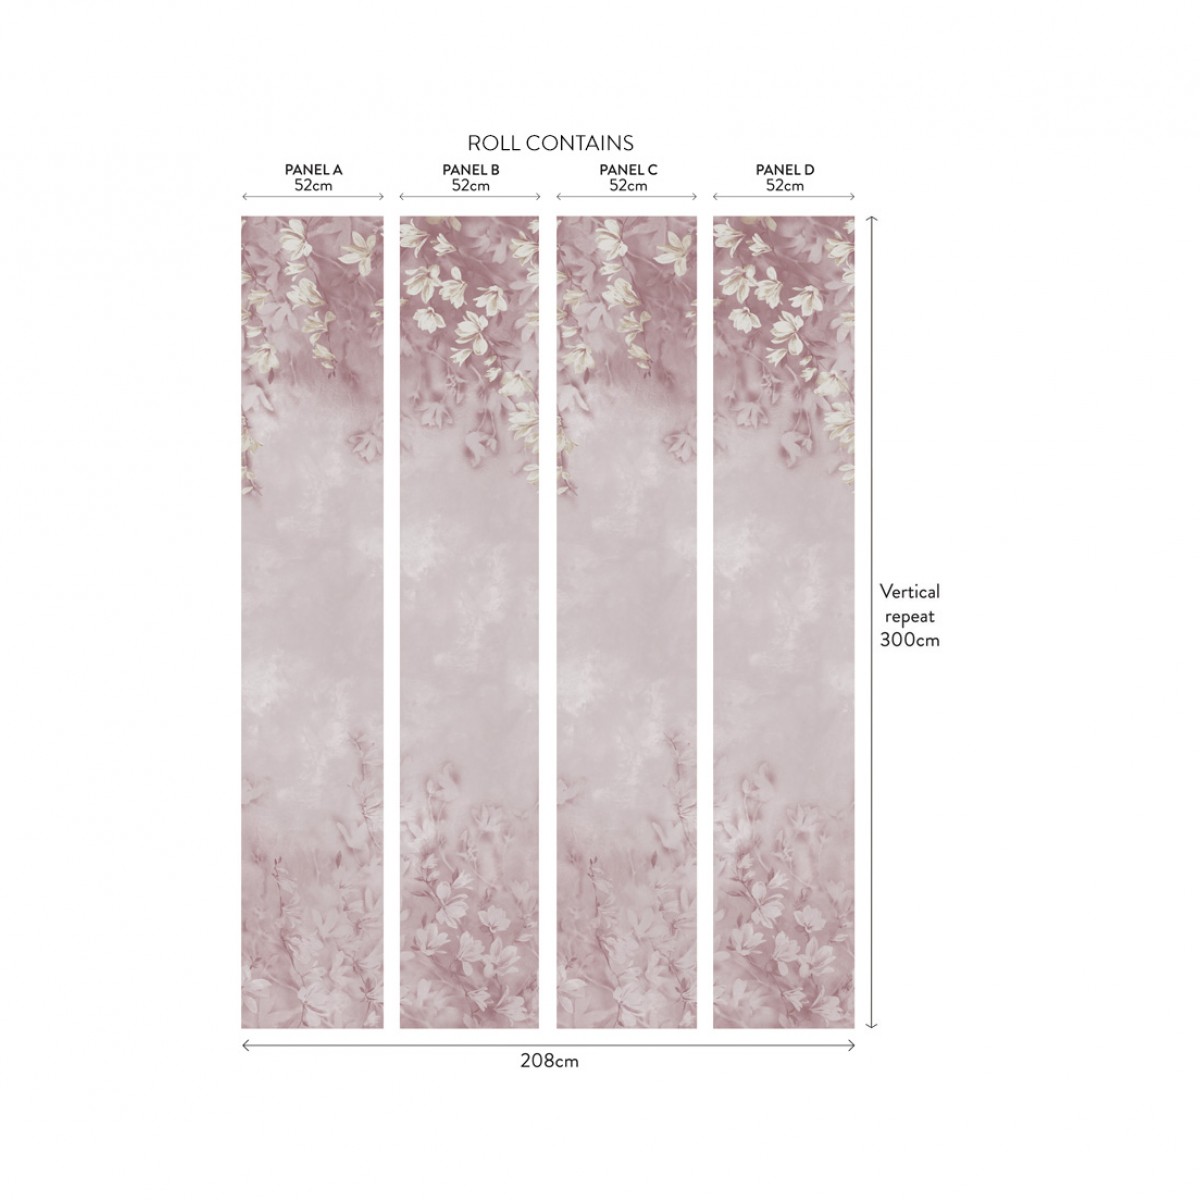 Tapet Trailing Magnolia, Blush Pink Luxury Floral, 1838 Wallcoverings, 6.5mp / rola, Tapet living 